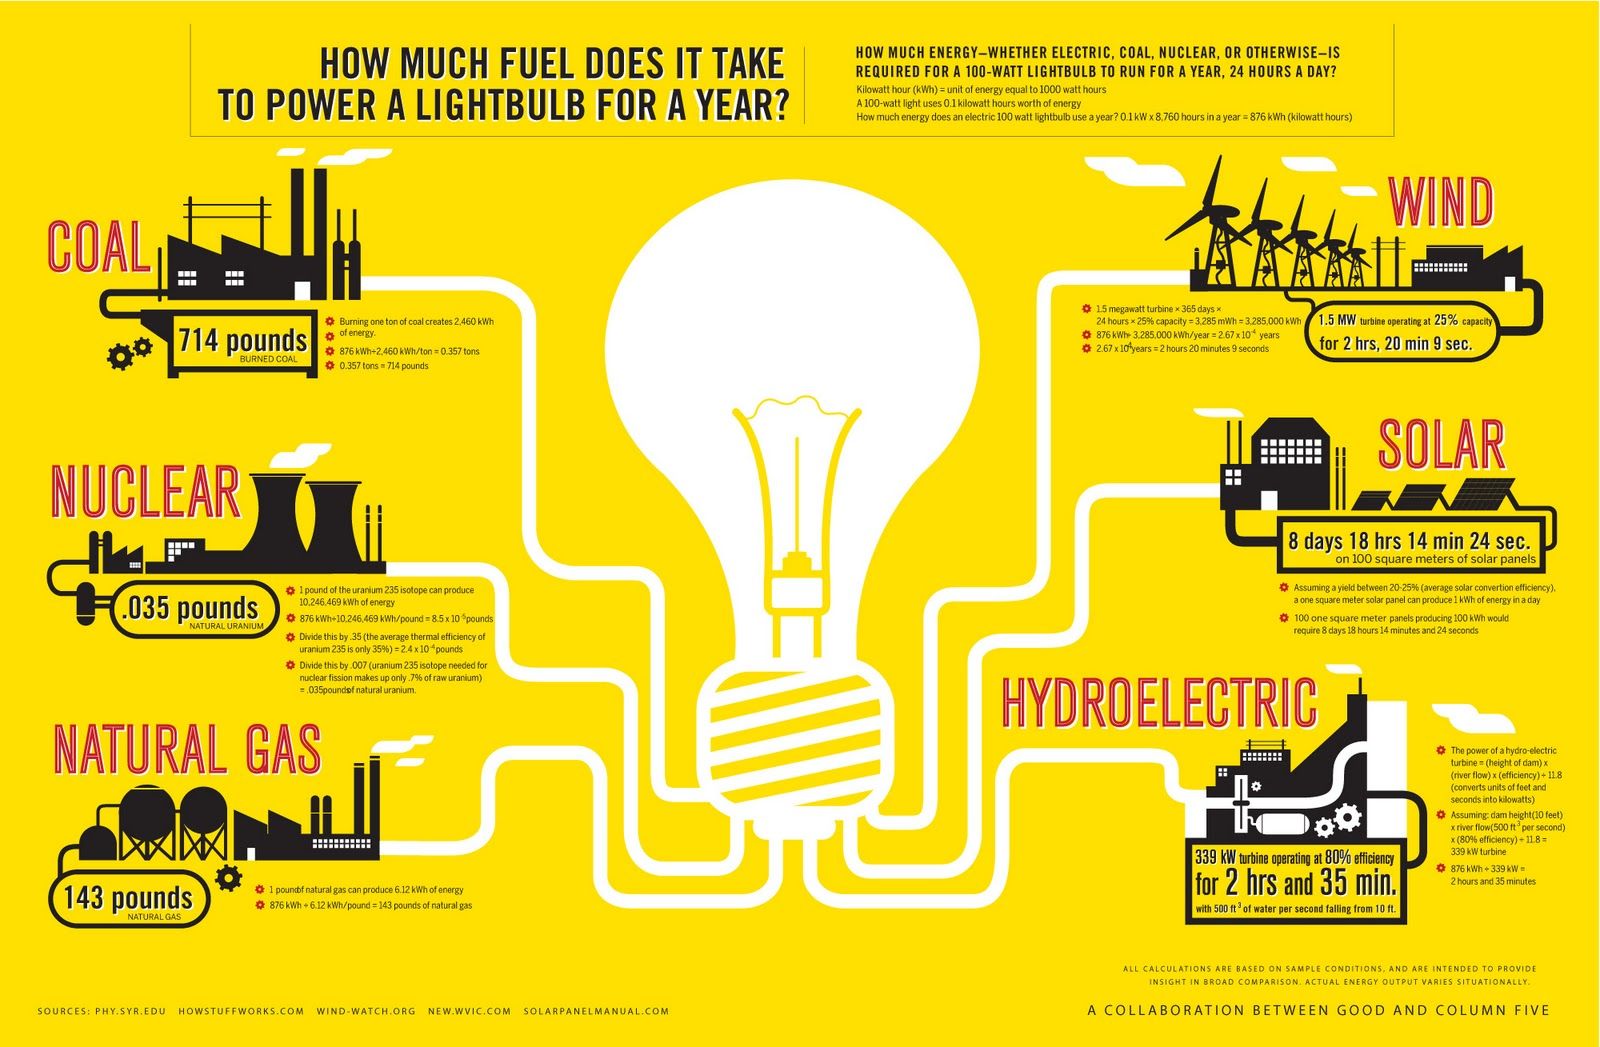 How Much Fuel Does It Take To Power A Lightbulb For A Year? [INFOGRAPHIC]